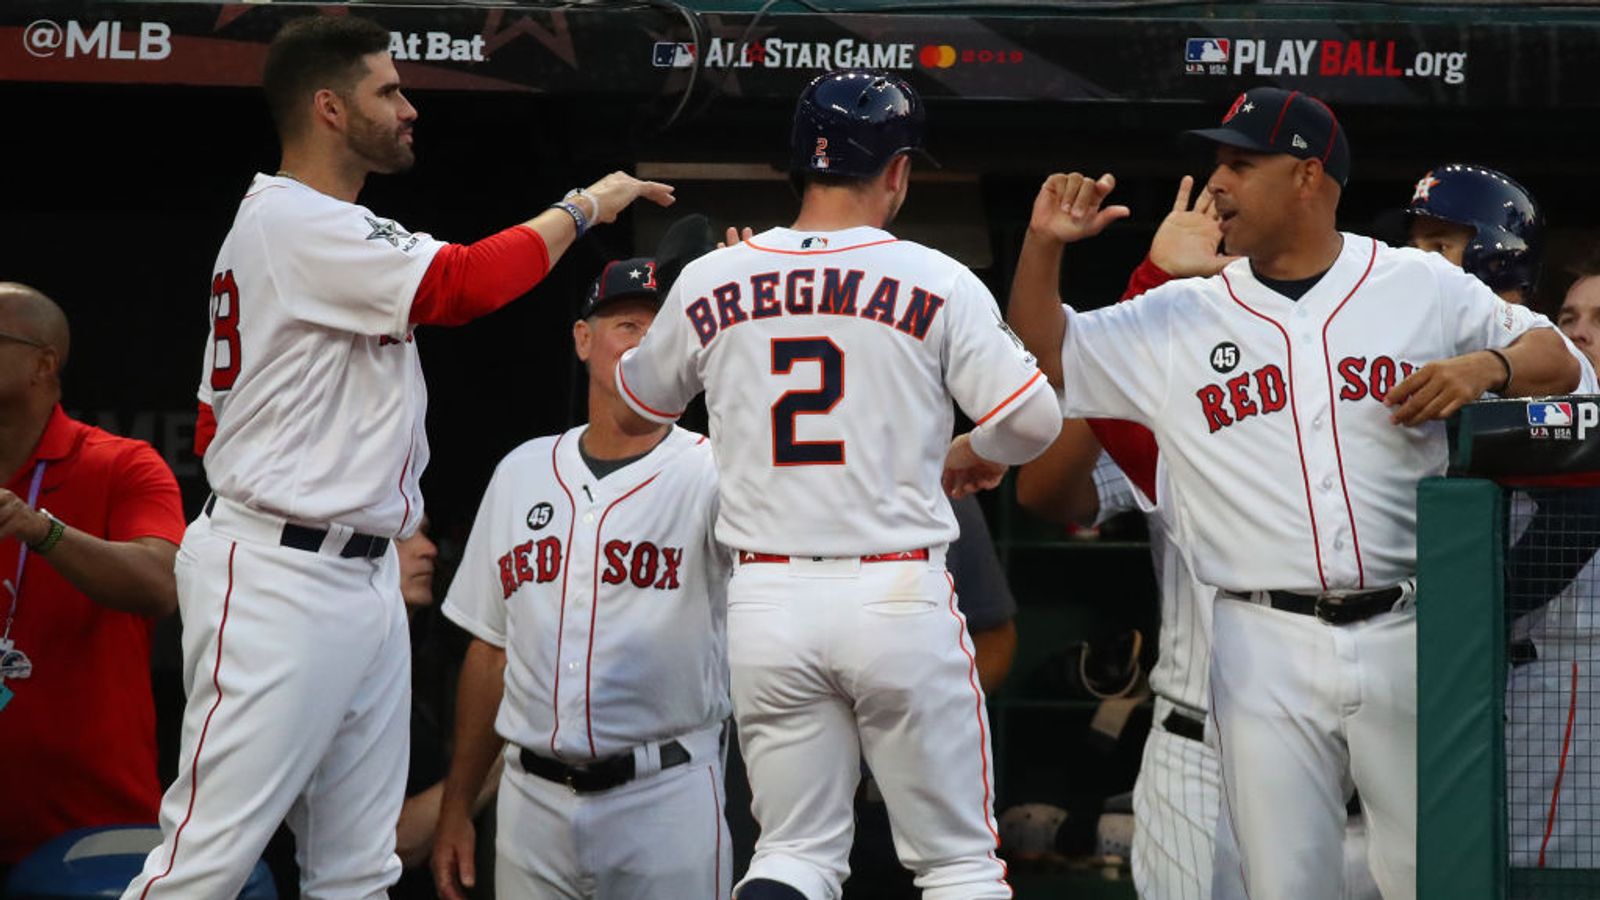 Houston Astros cheating scandal hangs over this World Series - The